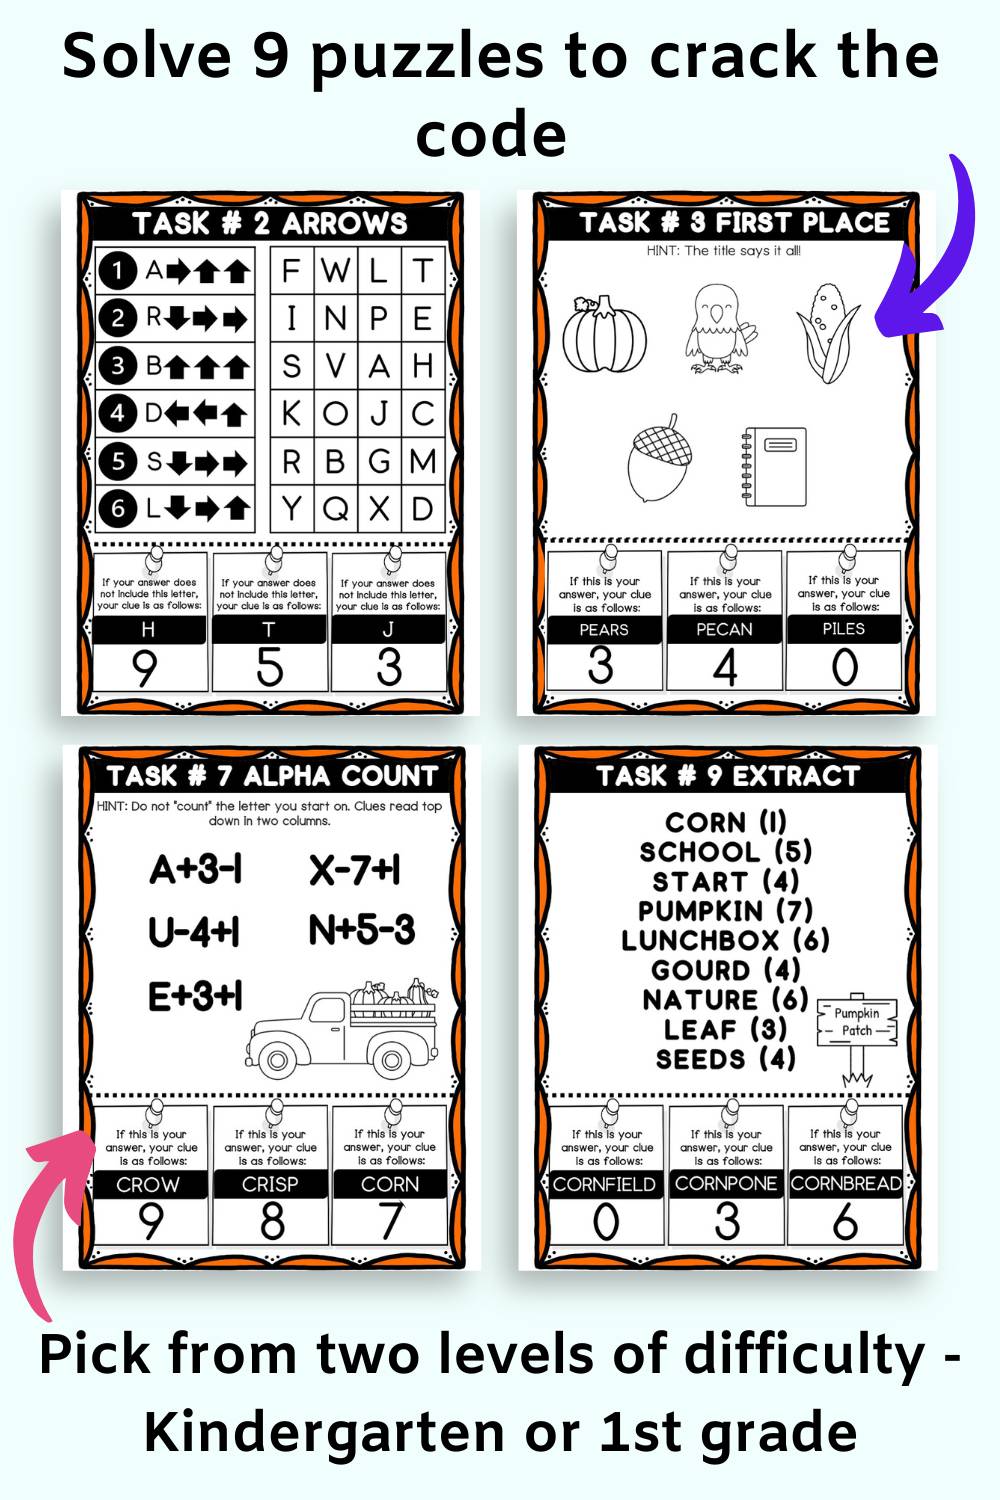 Text "solve 9 puzzles to crack the code" and "pick from two levels of difficulty - Kindergarten or 1st grade"